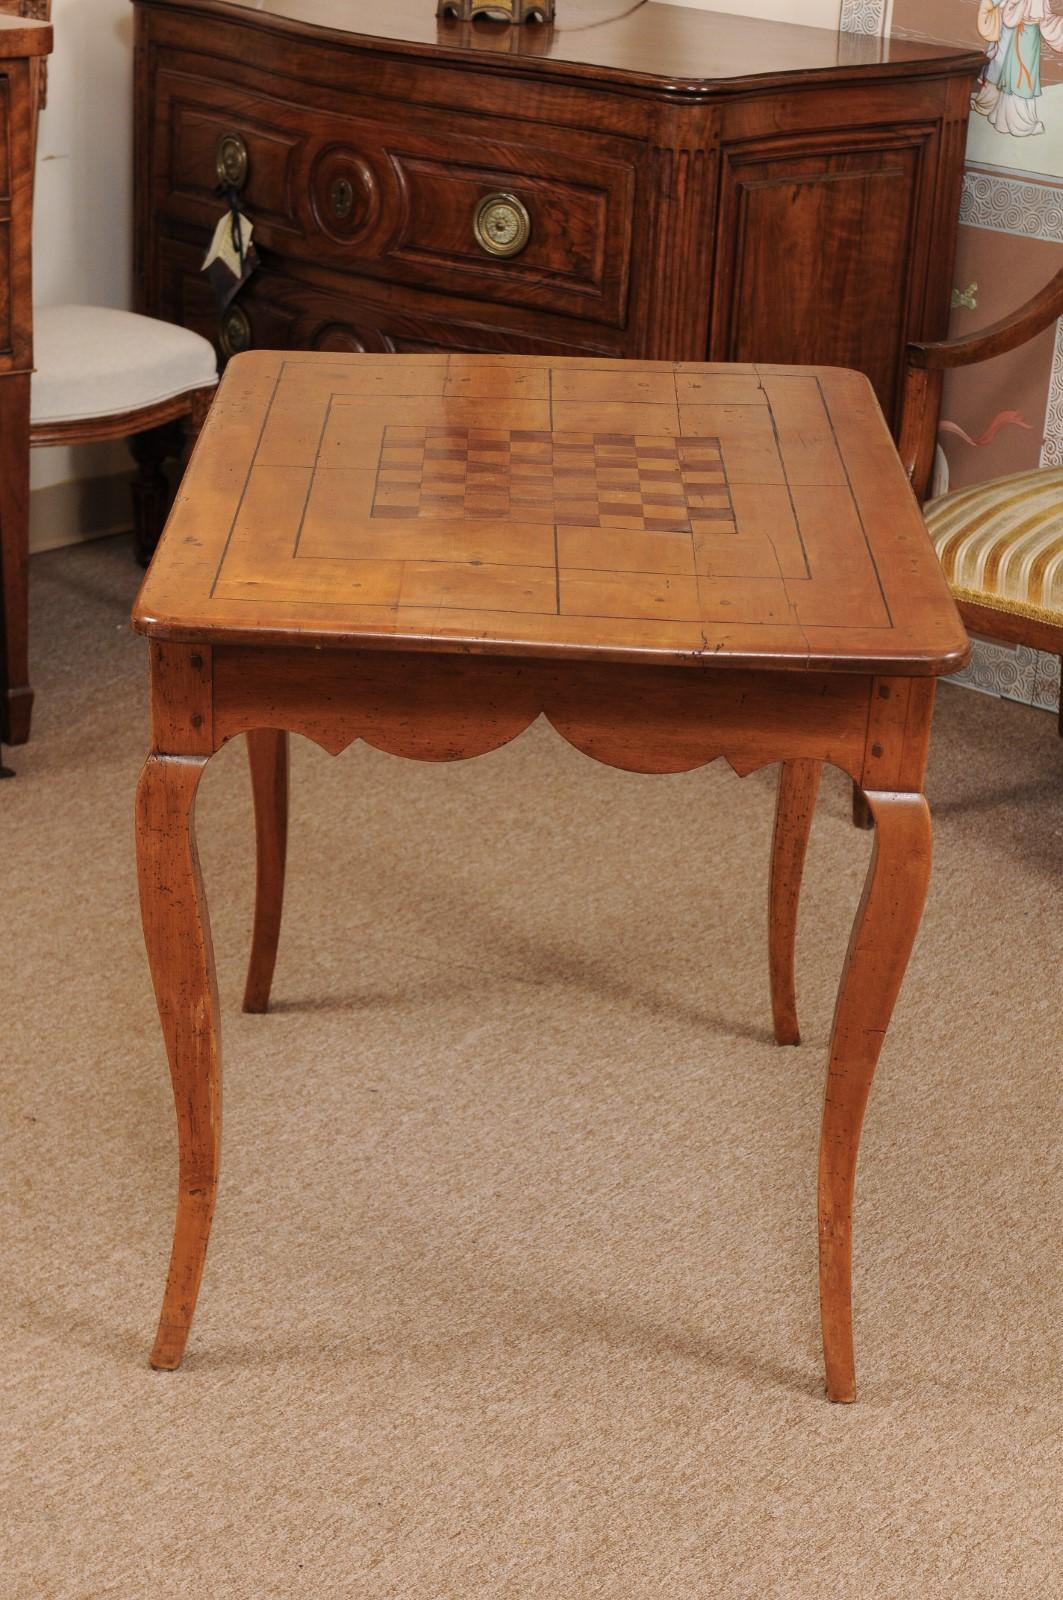 French Louis XV Fruitwood Parquetry Inlaid Table, Mid-18th Century For Sale 5